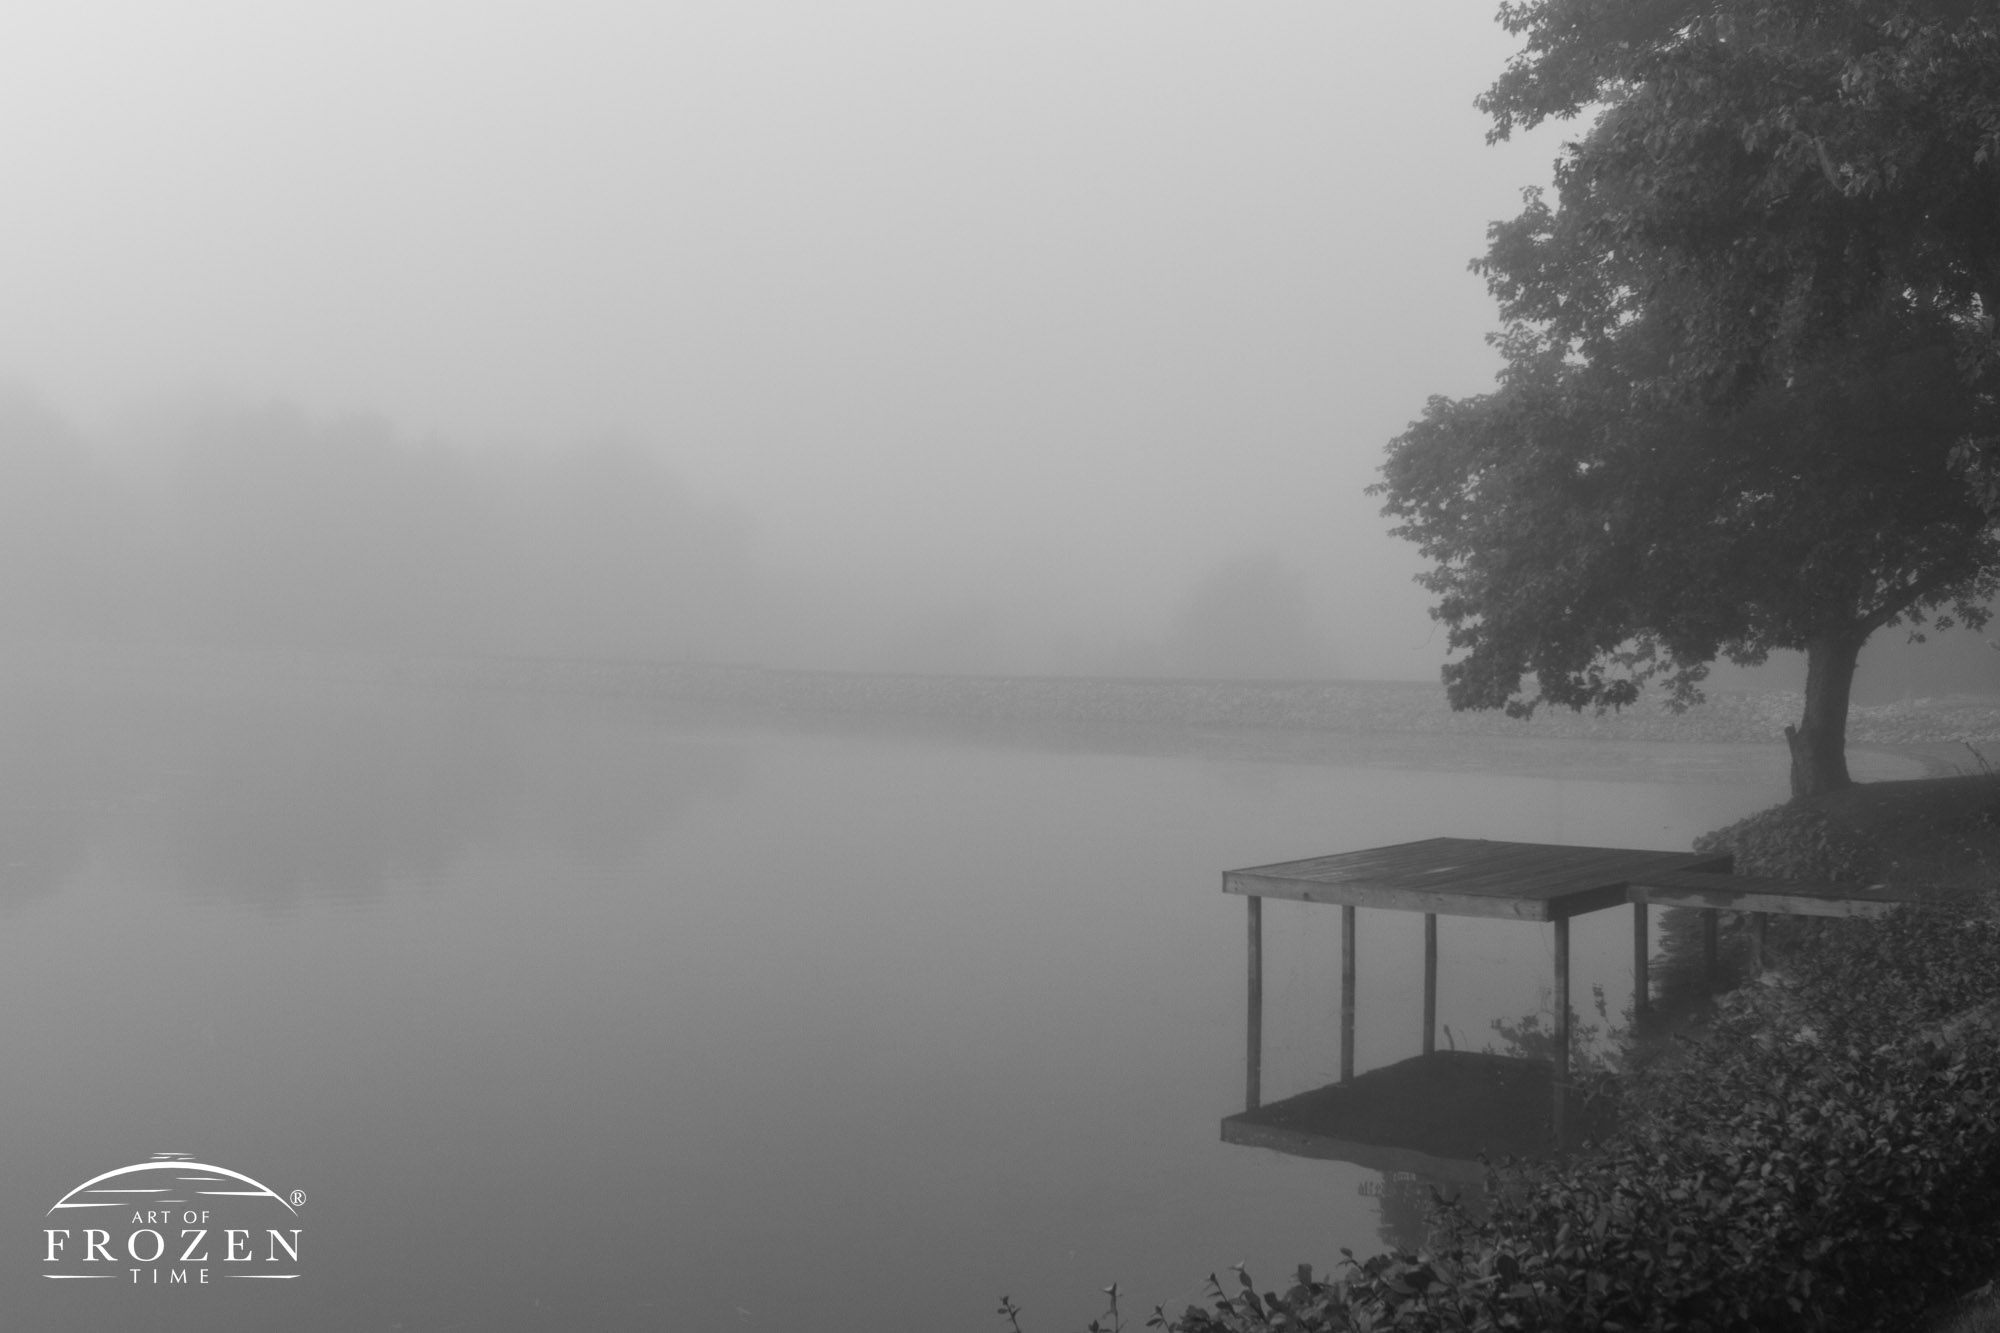 A dock leading to a large pond whose distant shoreline is obscured by heavy fog making for a moody image over O’Fallon Illinois.